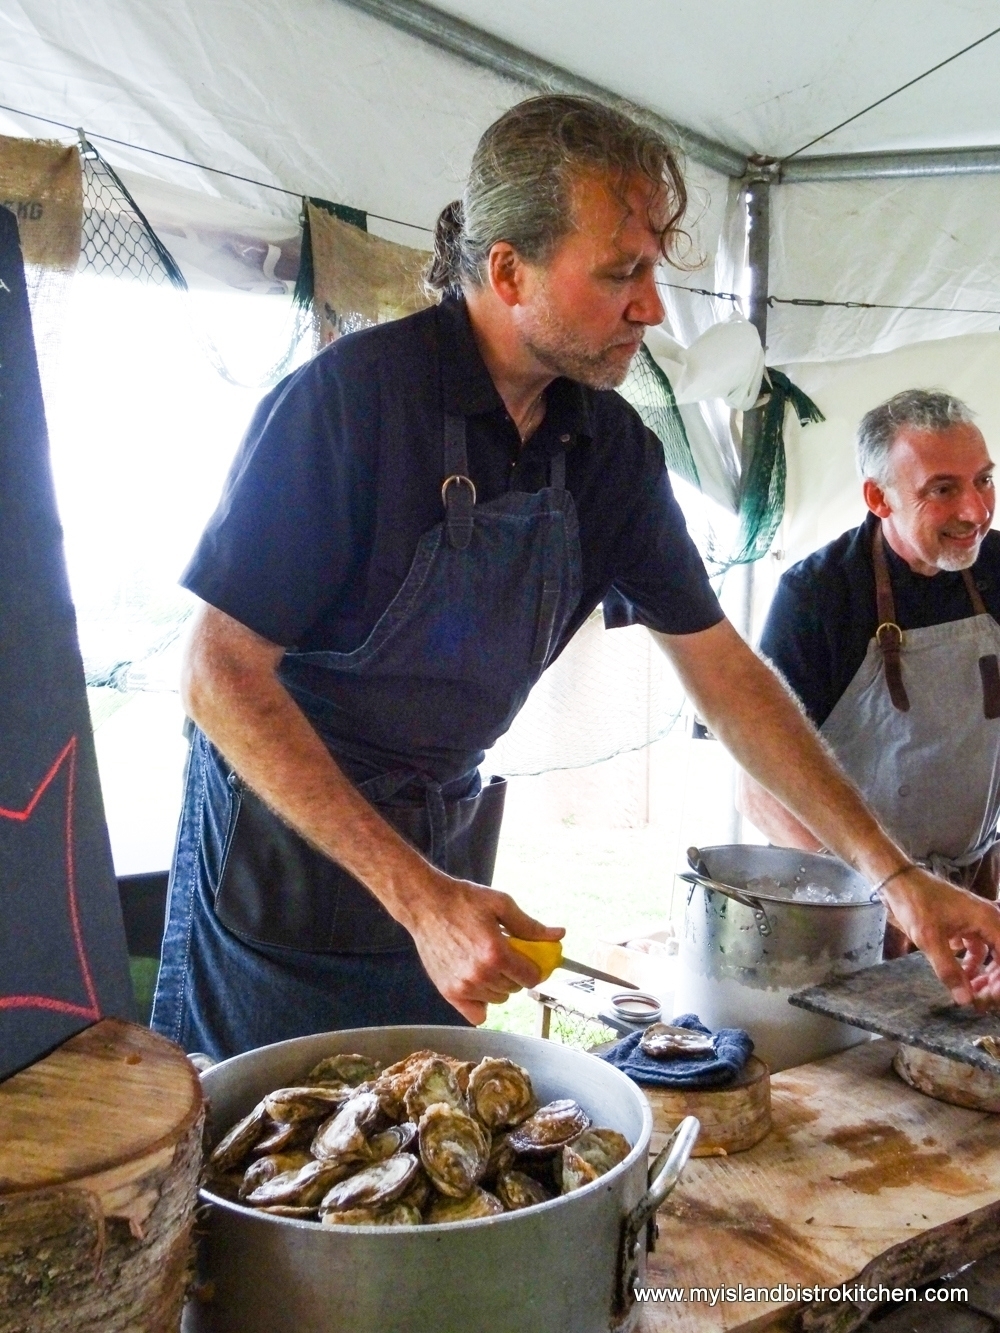 Chefs Michael Smith (l) and Paul Rogalski (r) Shuck Oysters at "Taste of Georgetown" Event